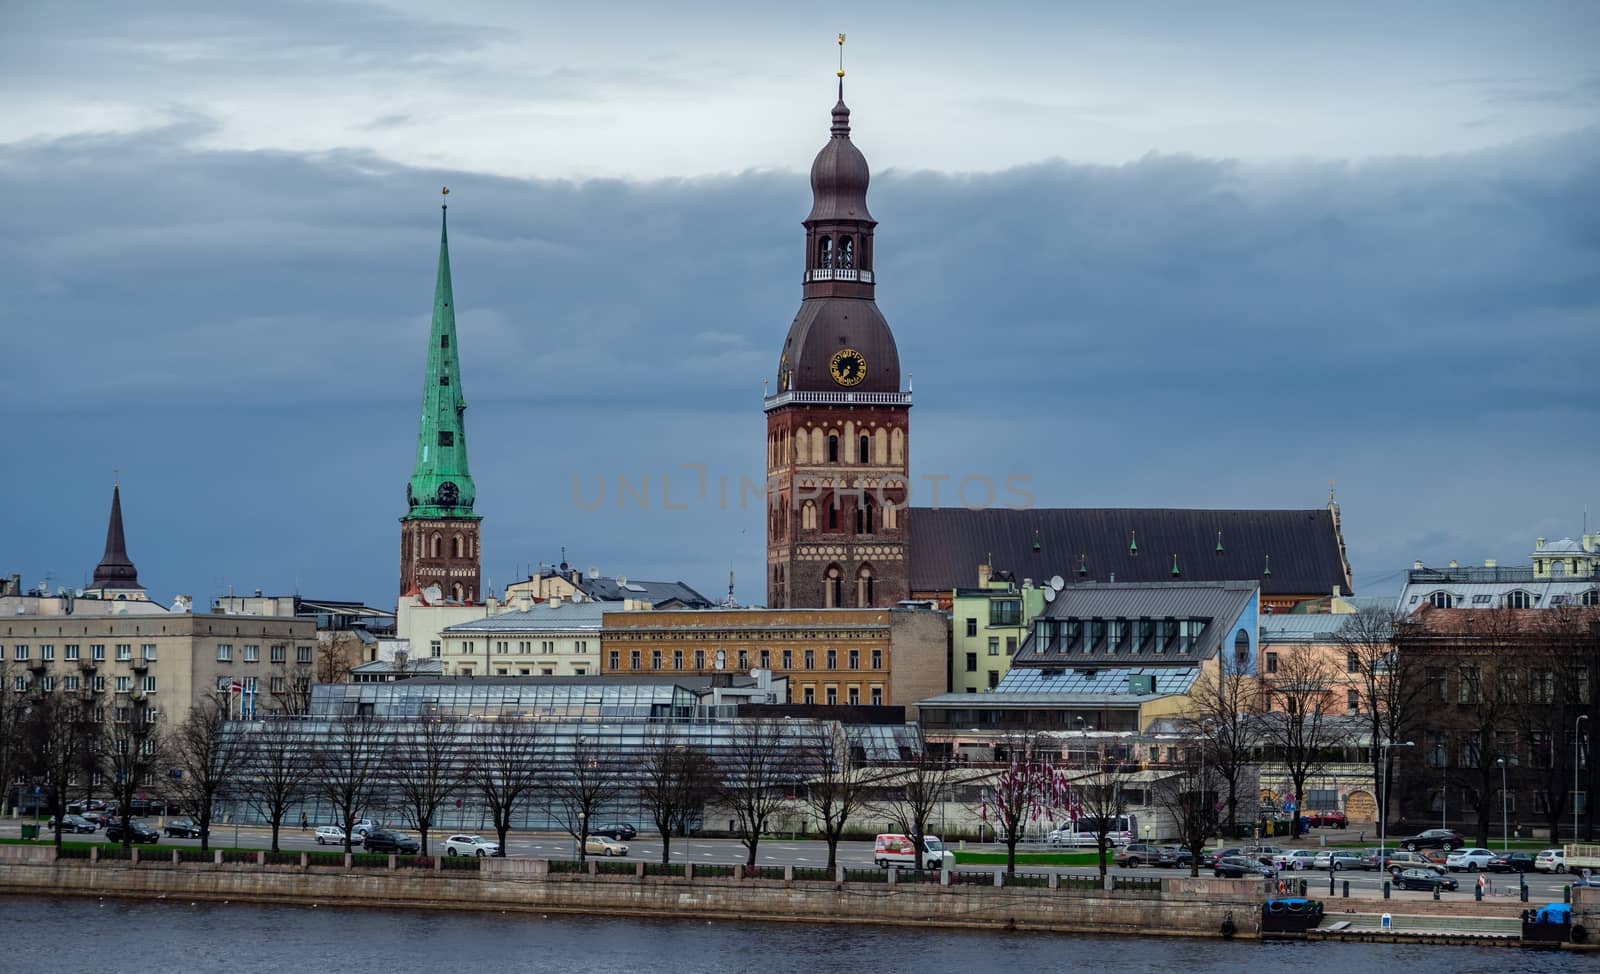 April 24, 2018 Riga, Latvia. The Dome Cathedral
in the old town in Riga